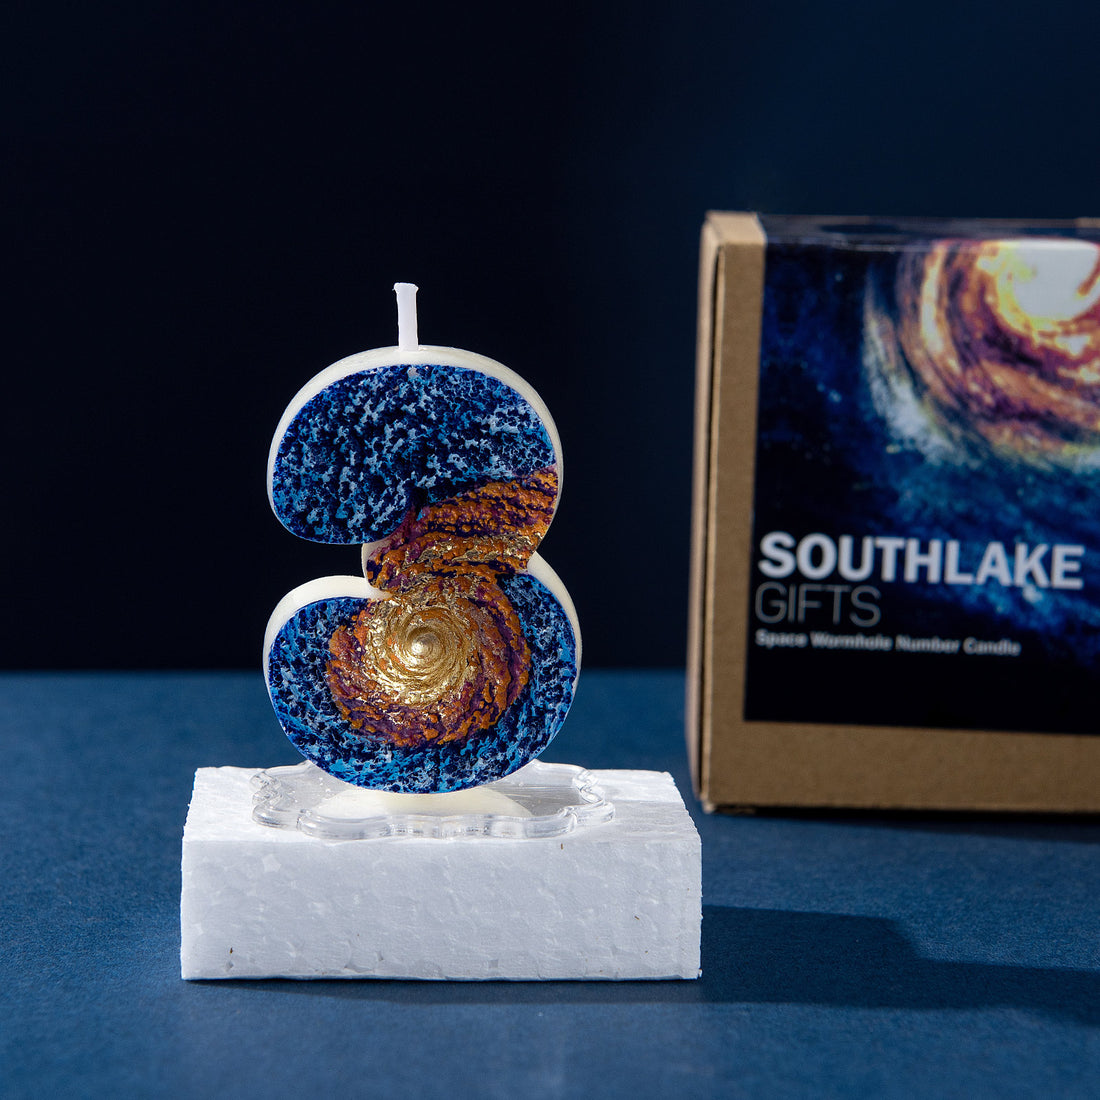 Galaxy Wormhole Candle Number 3 from Southlake Gifts